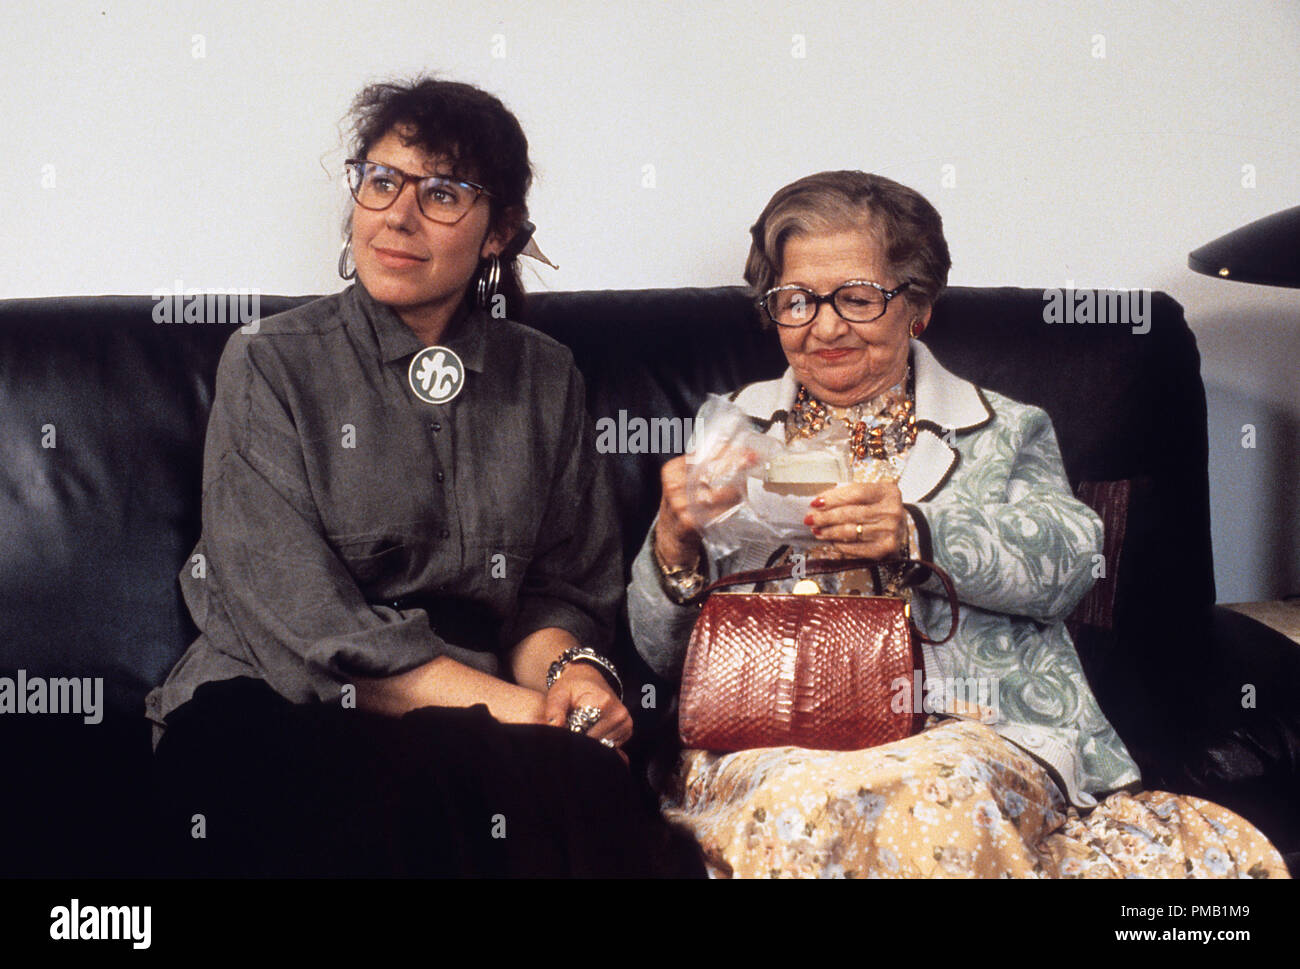 Film still or Publicity still from 'New York Stories' (Oedipus Wrecks) Julie Kavner, Mae Questel  © 1989 Touchstone Pictures  All Rights Reserved   File Reference # 33025 062THA  For Editorial Use Only Stock Photo